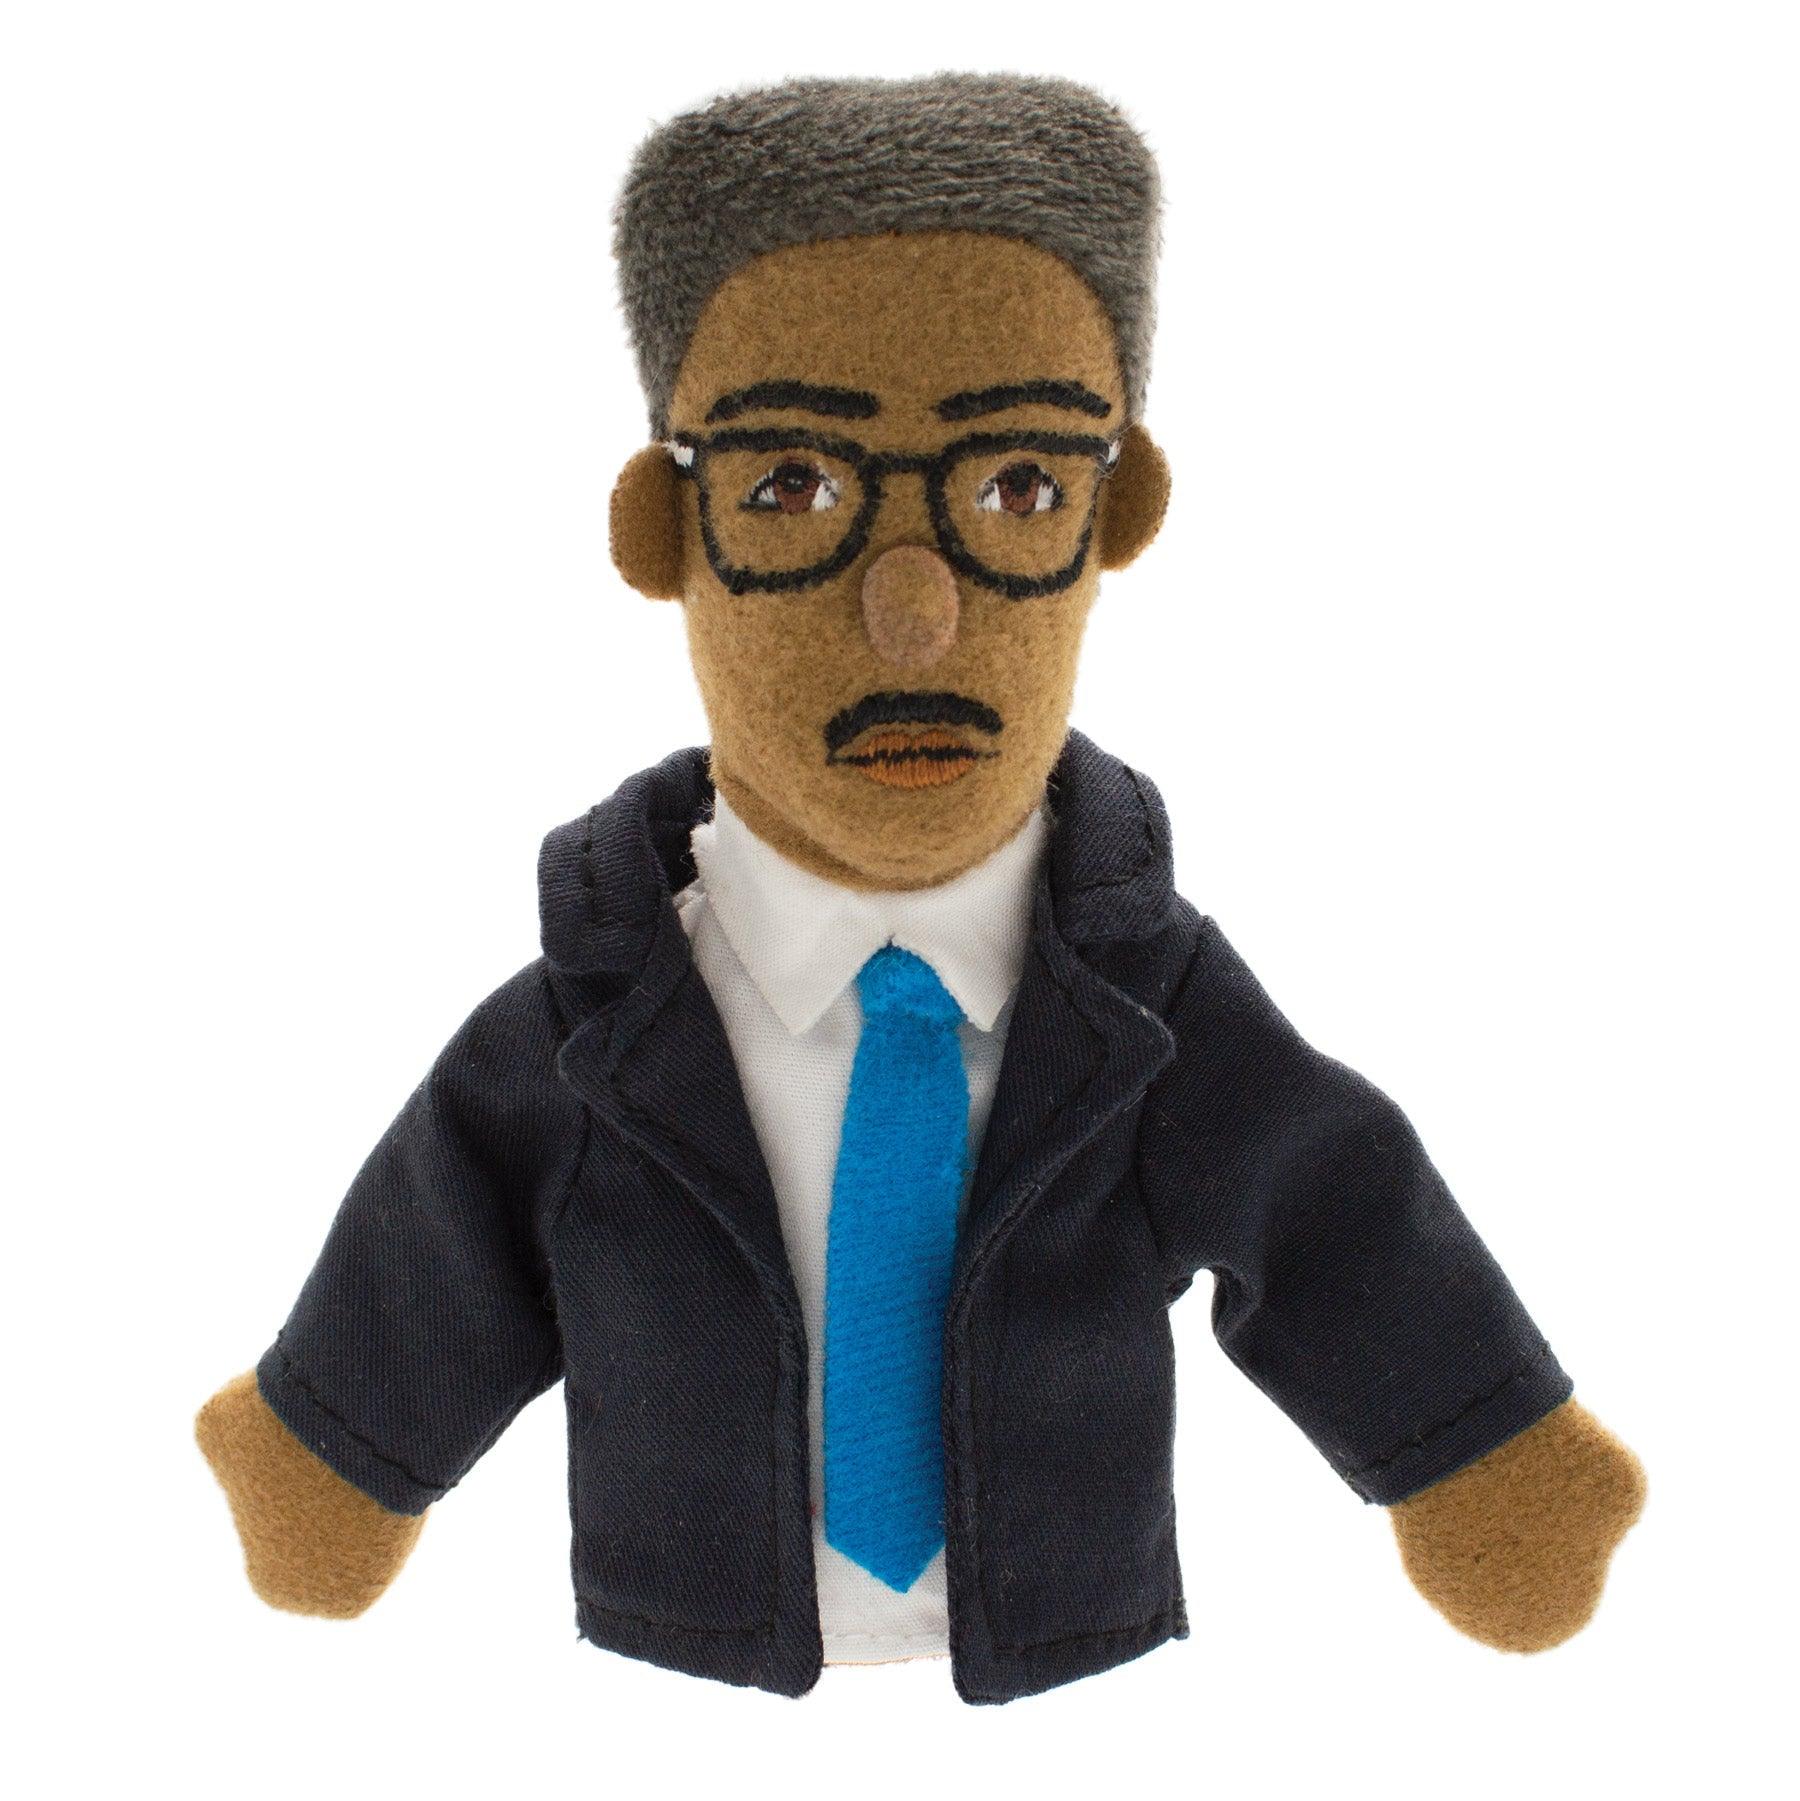 Product photo of Bayard Rustin Finger Puppet, a novelty gift manufactured by The Unemployed Philosophers Guild.